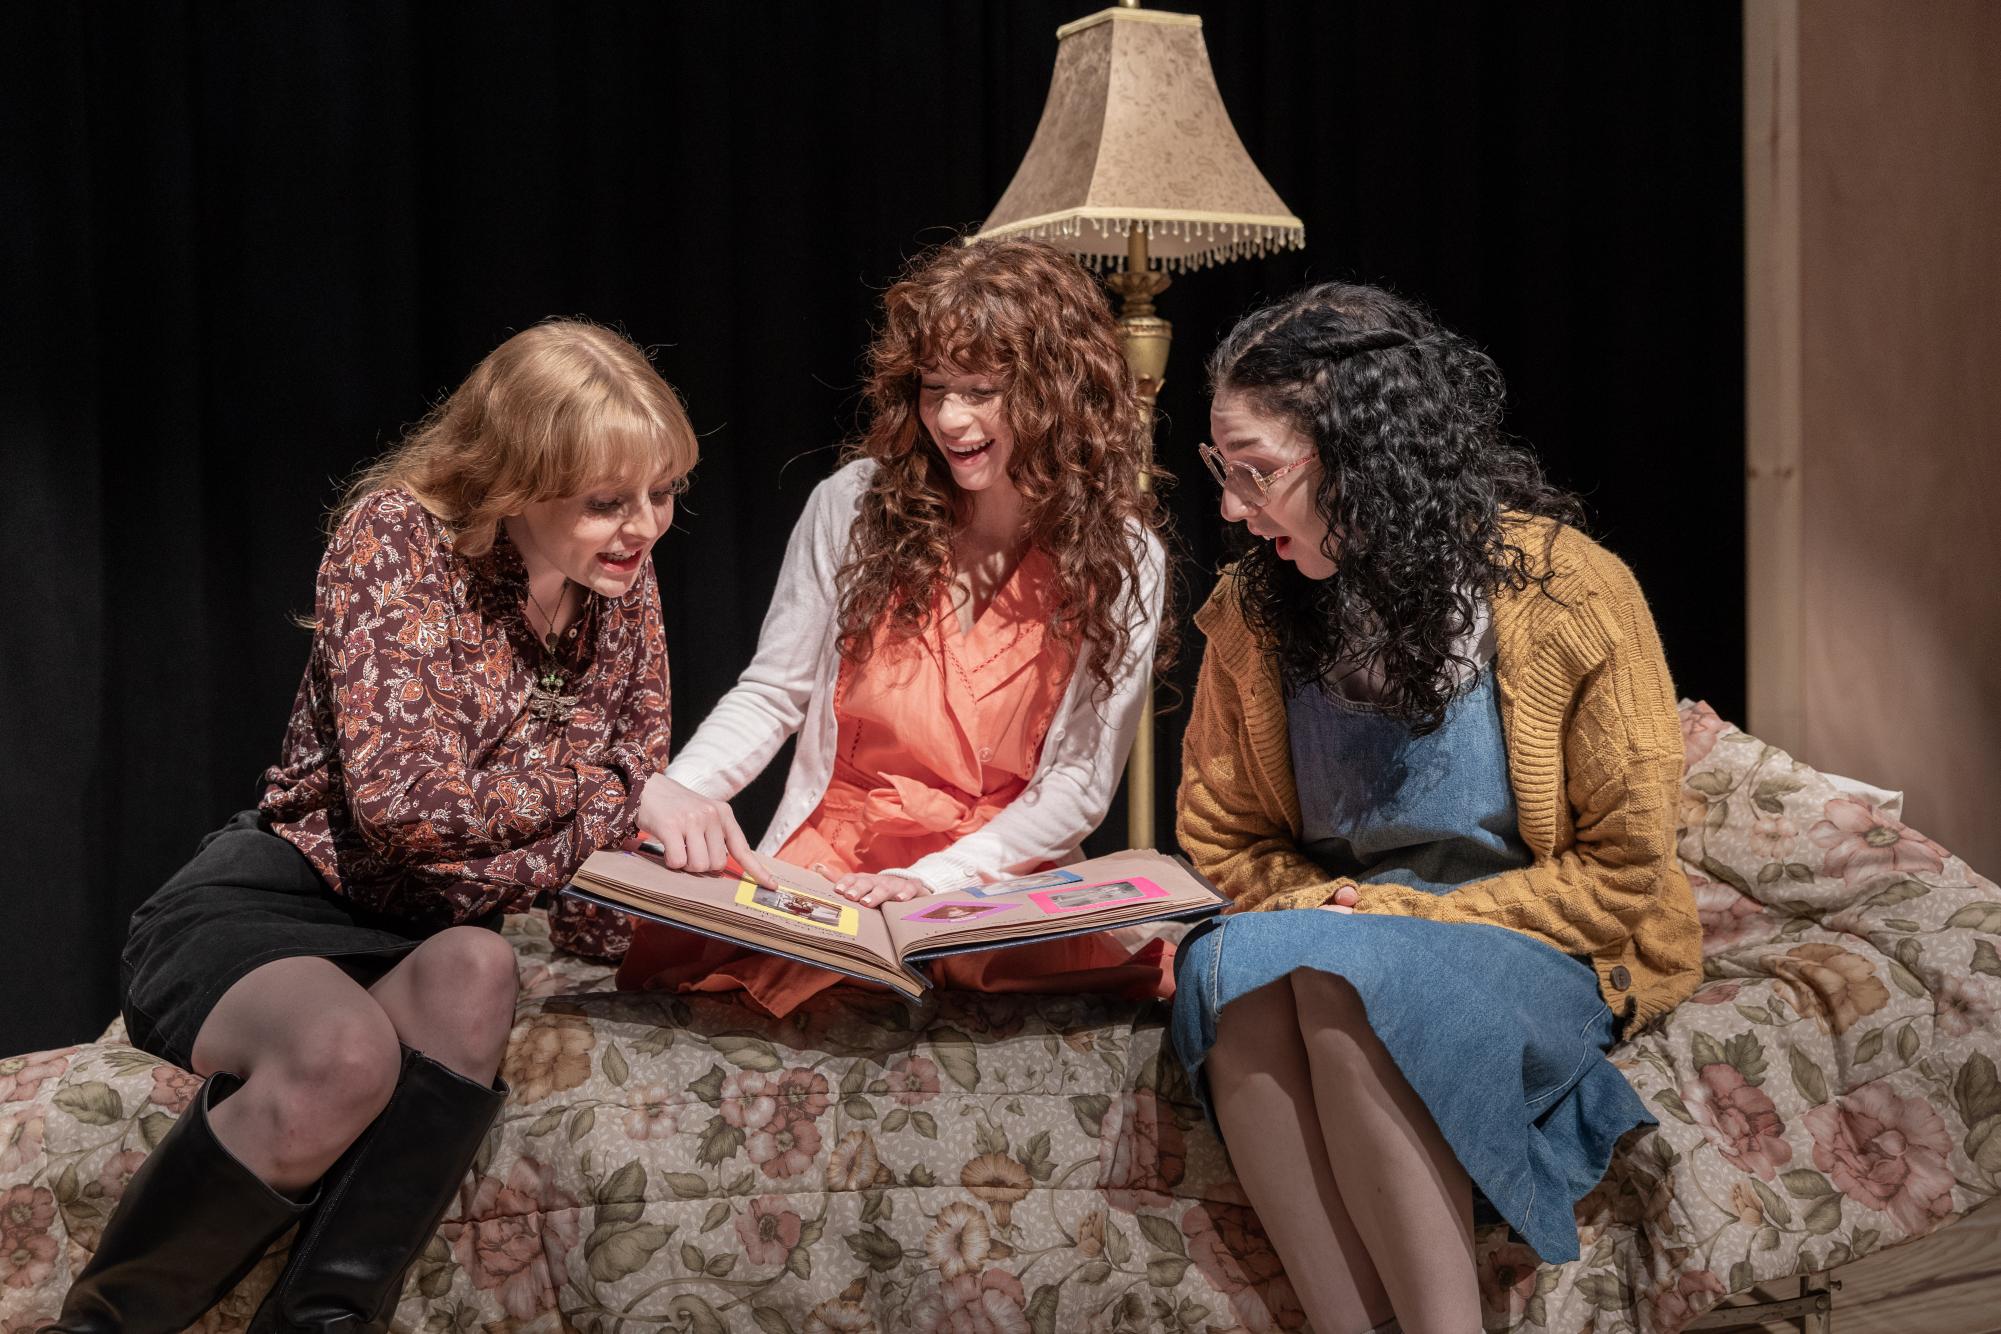 Lily Barger, Jenna Fleita and Molly Rosen (left to right) portray three long separated sisters finally reunited in Crimes of the Heart, the spring show directed by Kevin Long. (Photo by Steve Donisch)